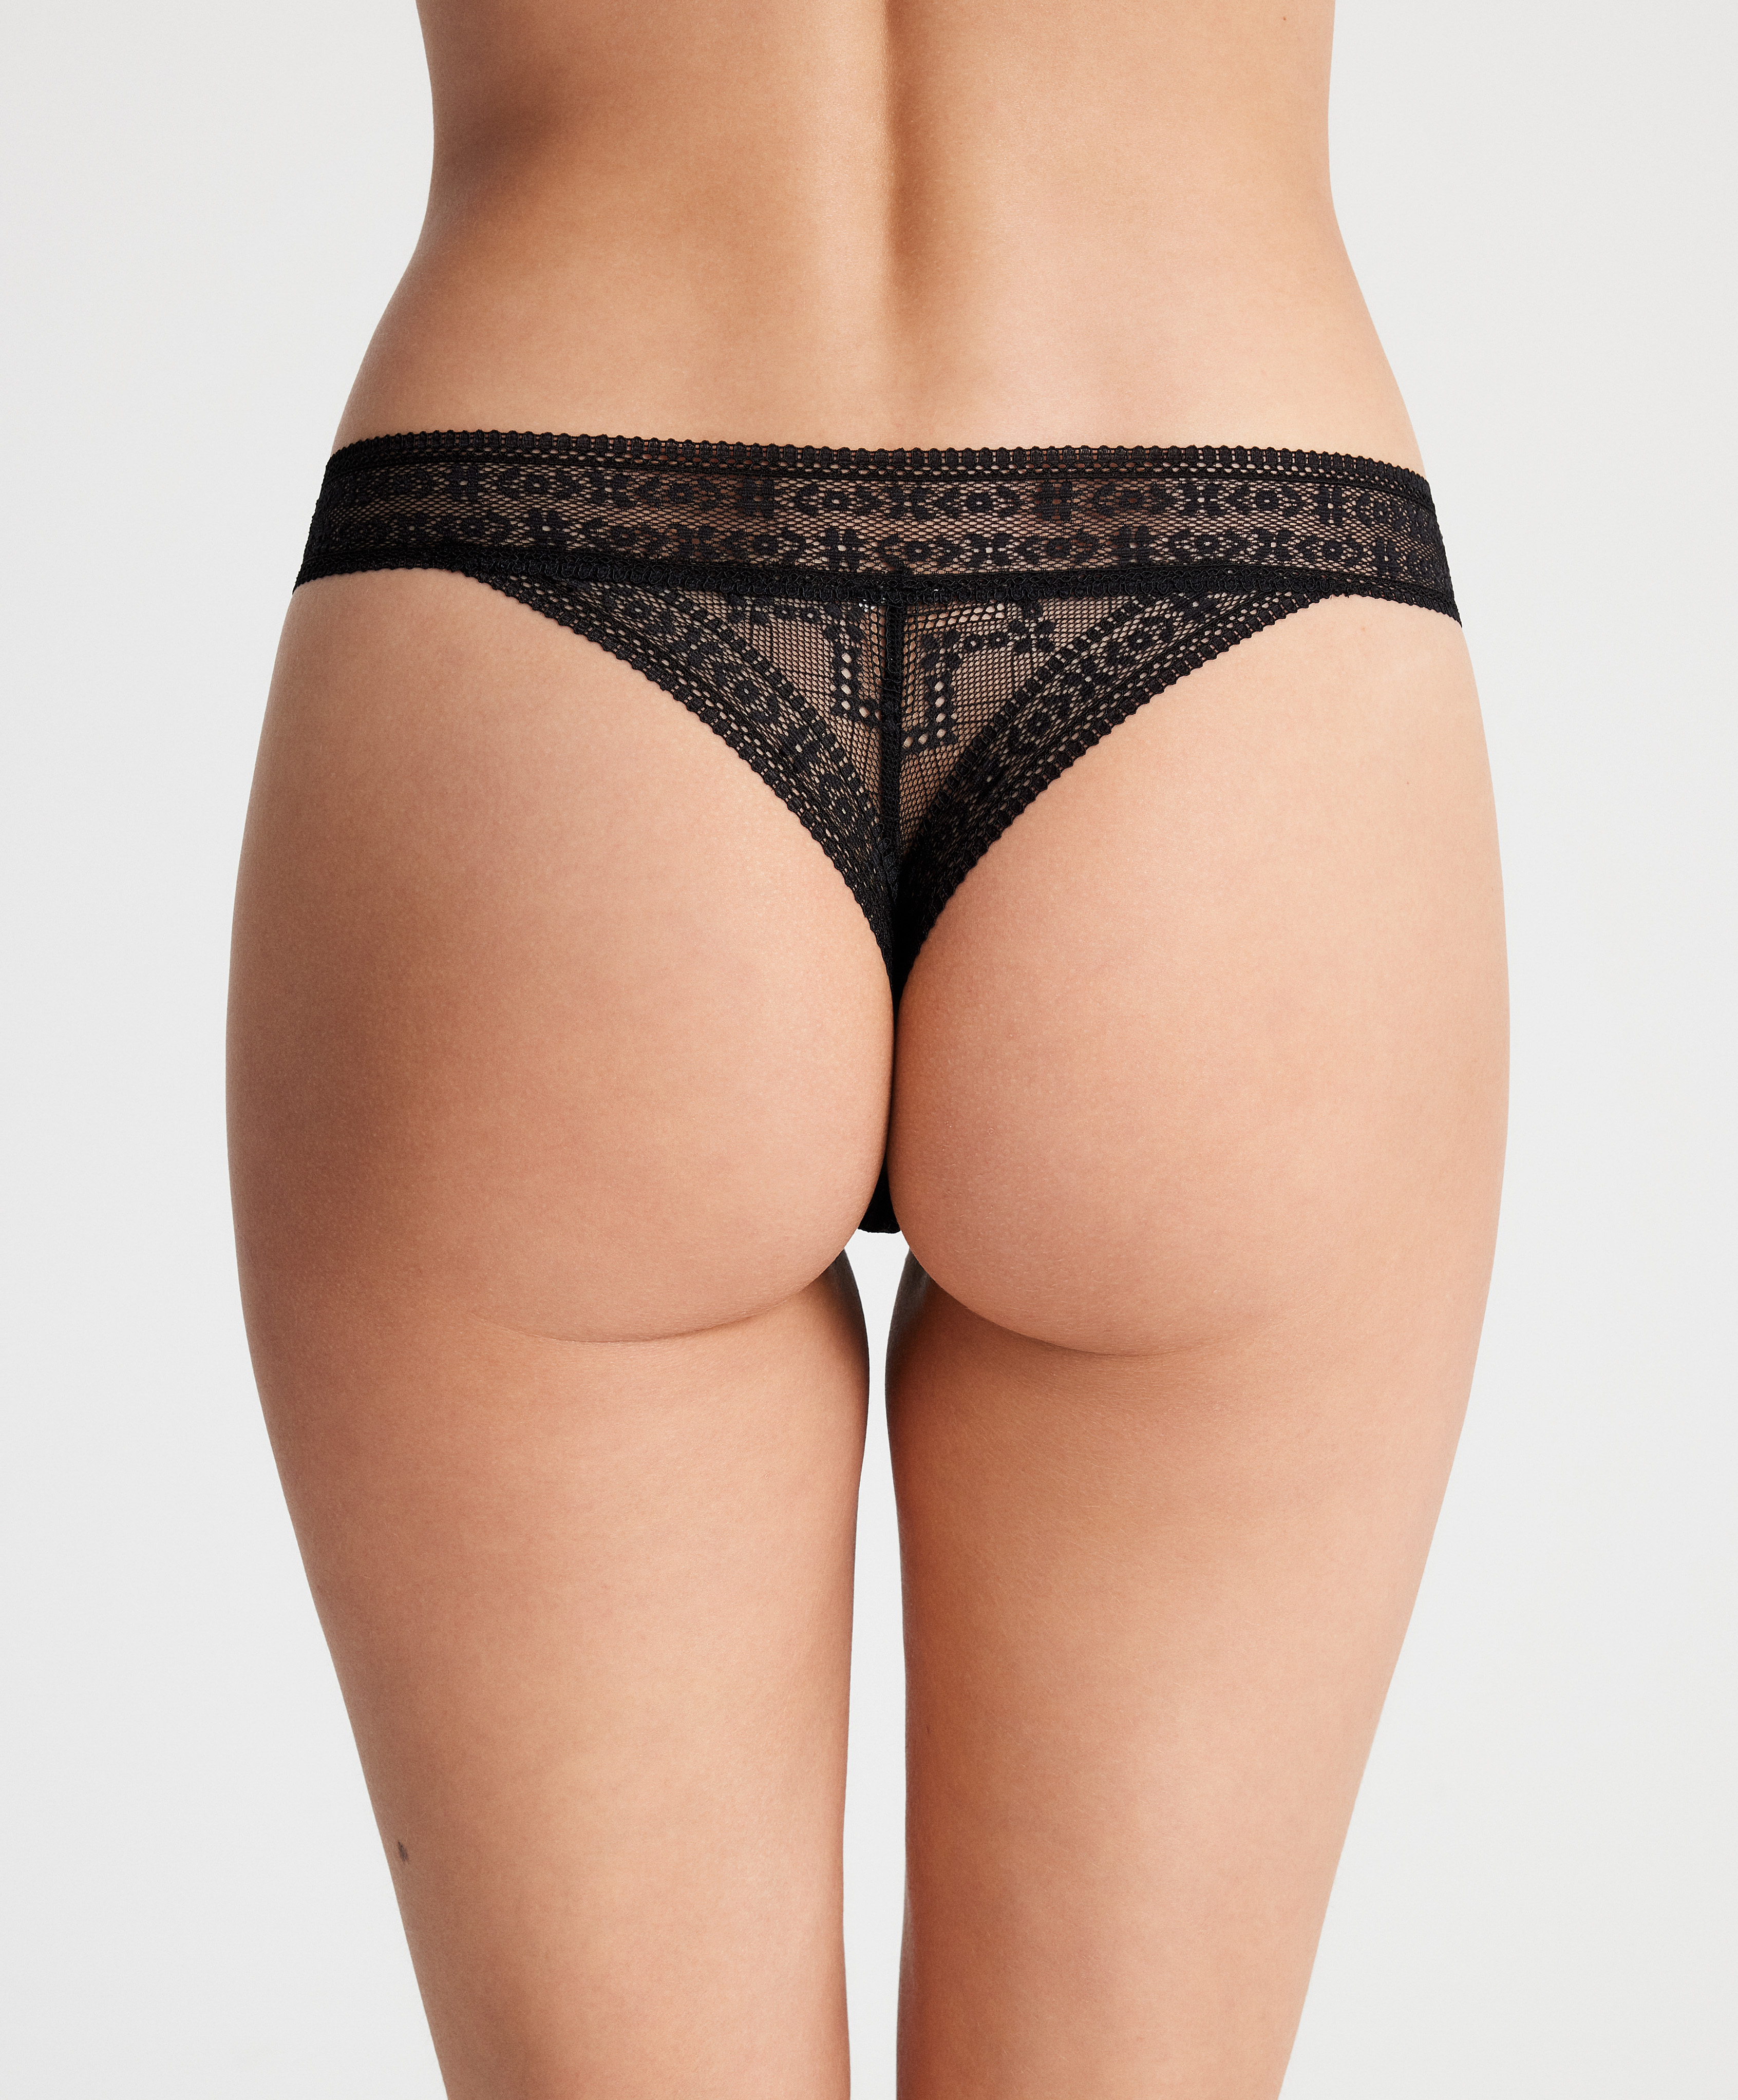 V-cut thong in floral lace